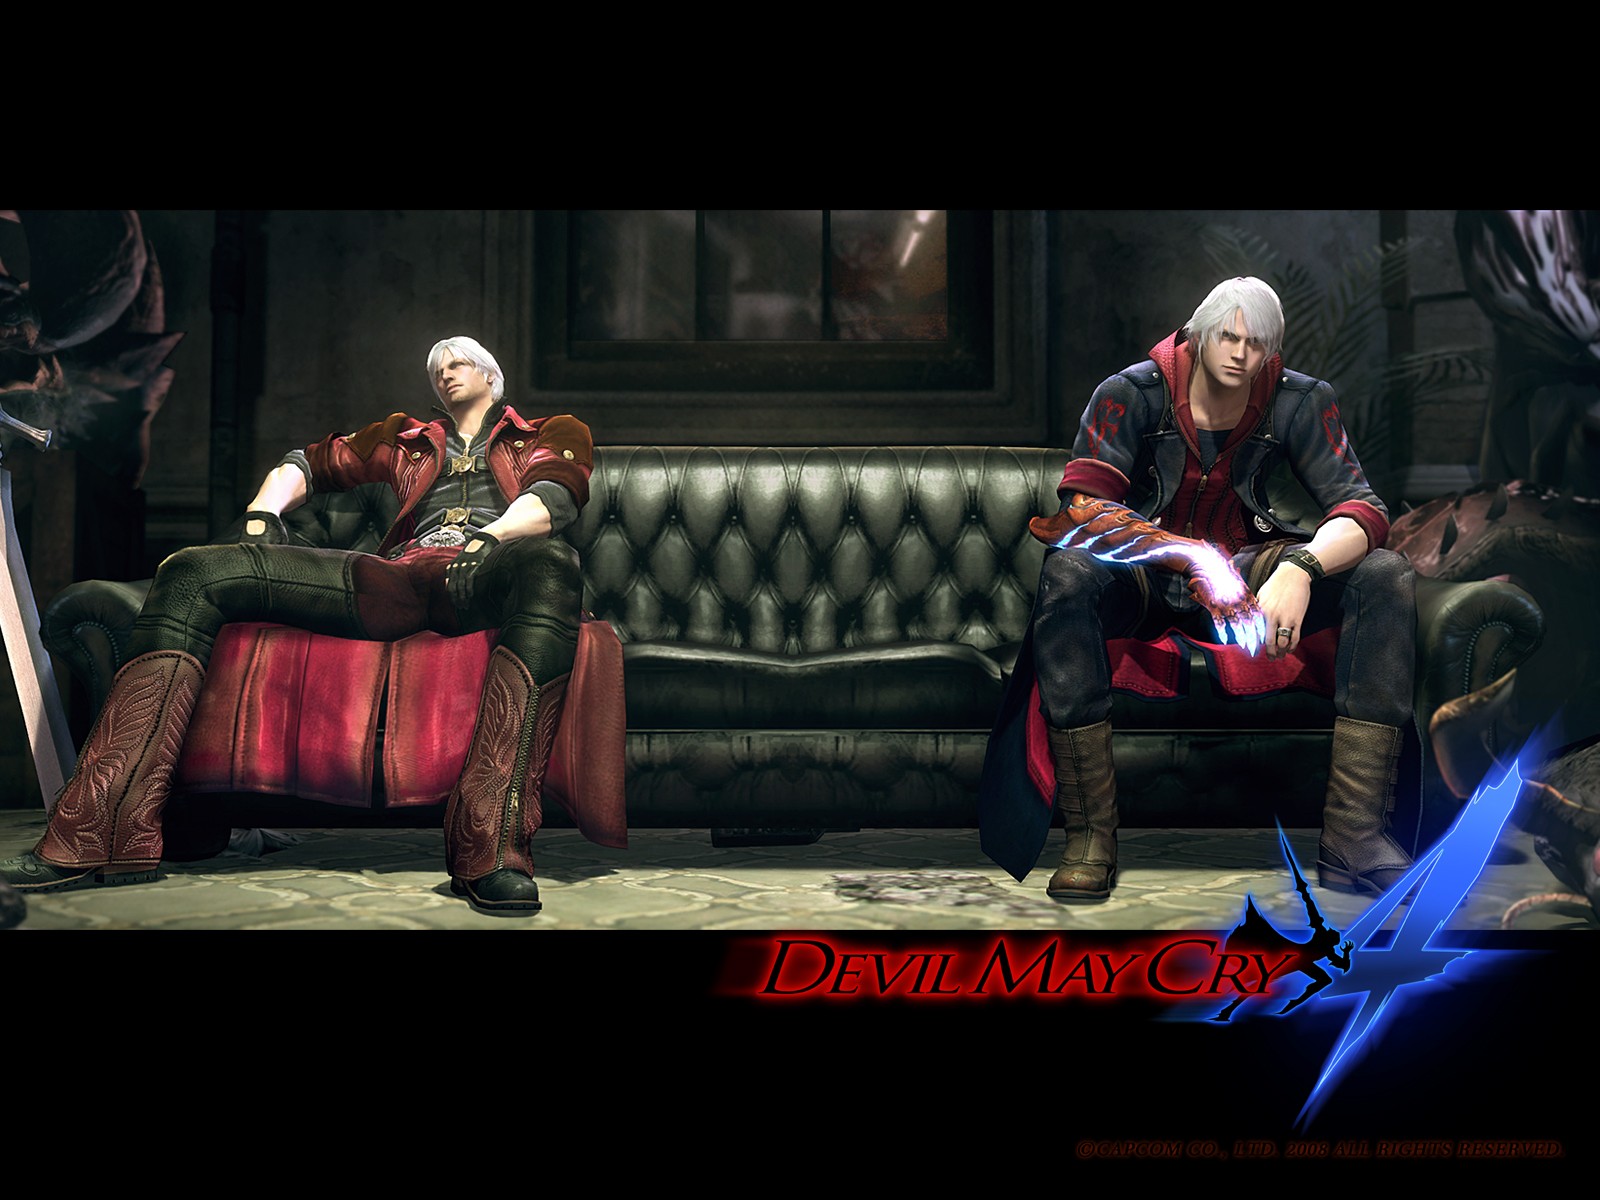 Nice Images Collection: Devil May Cry 4 Desktop Wallpapers